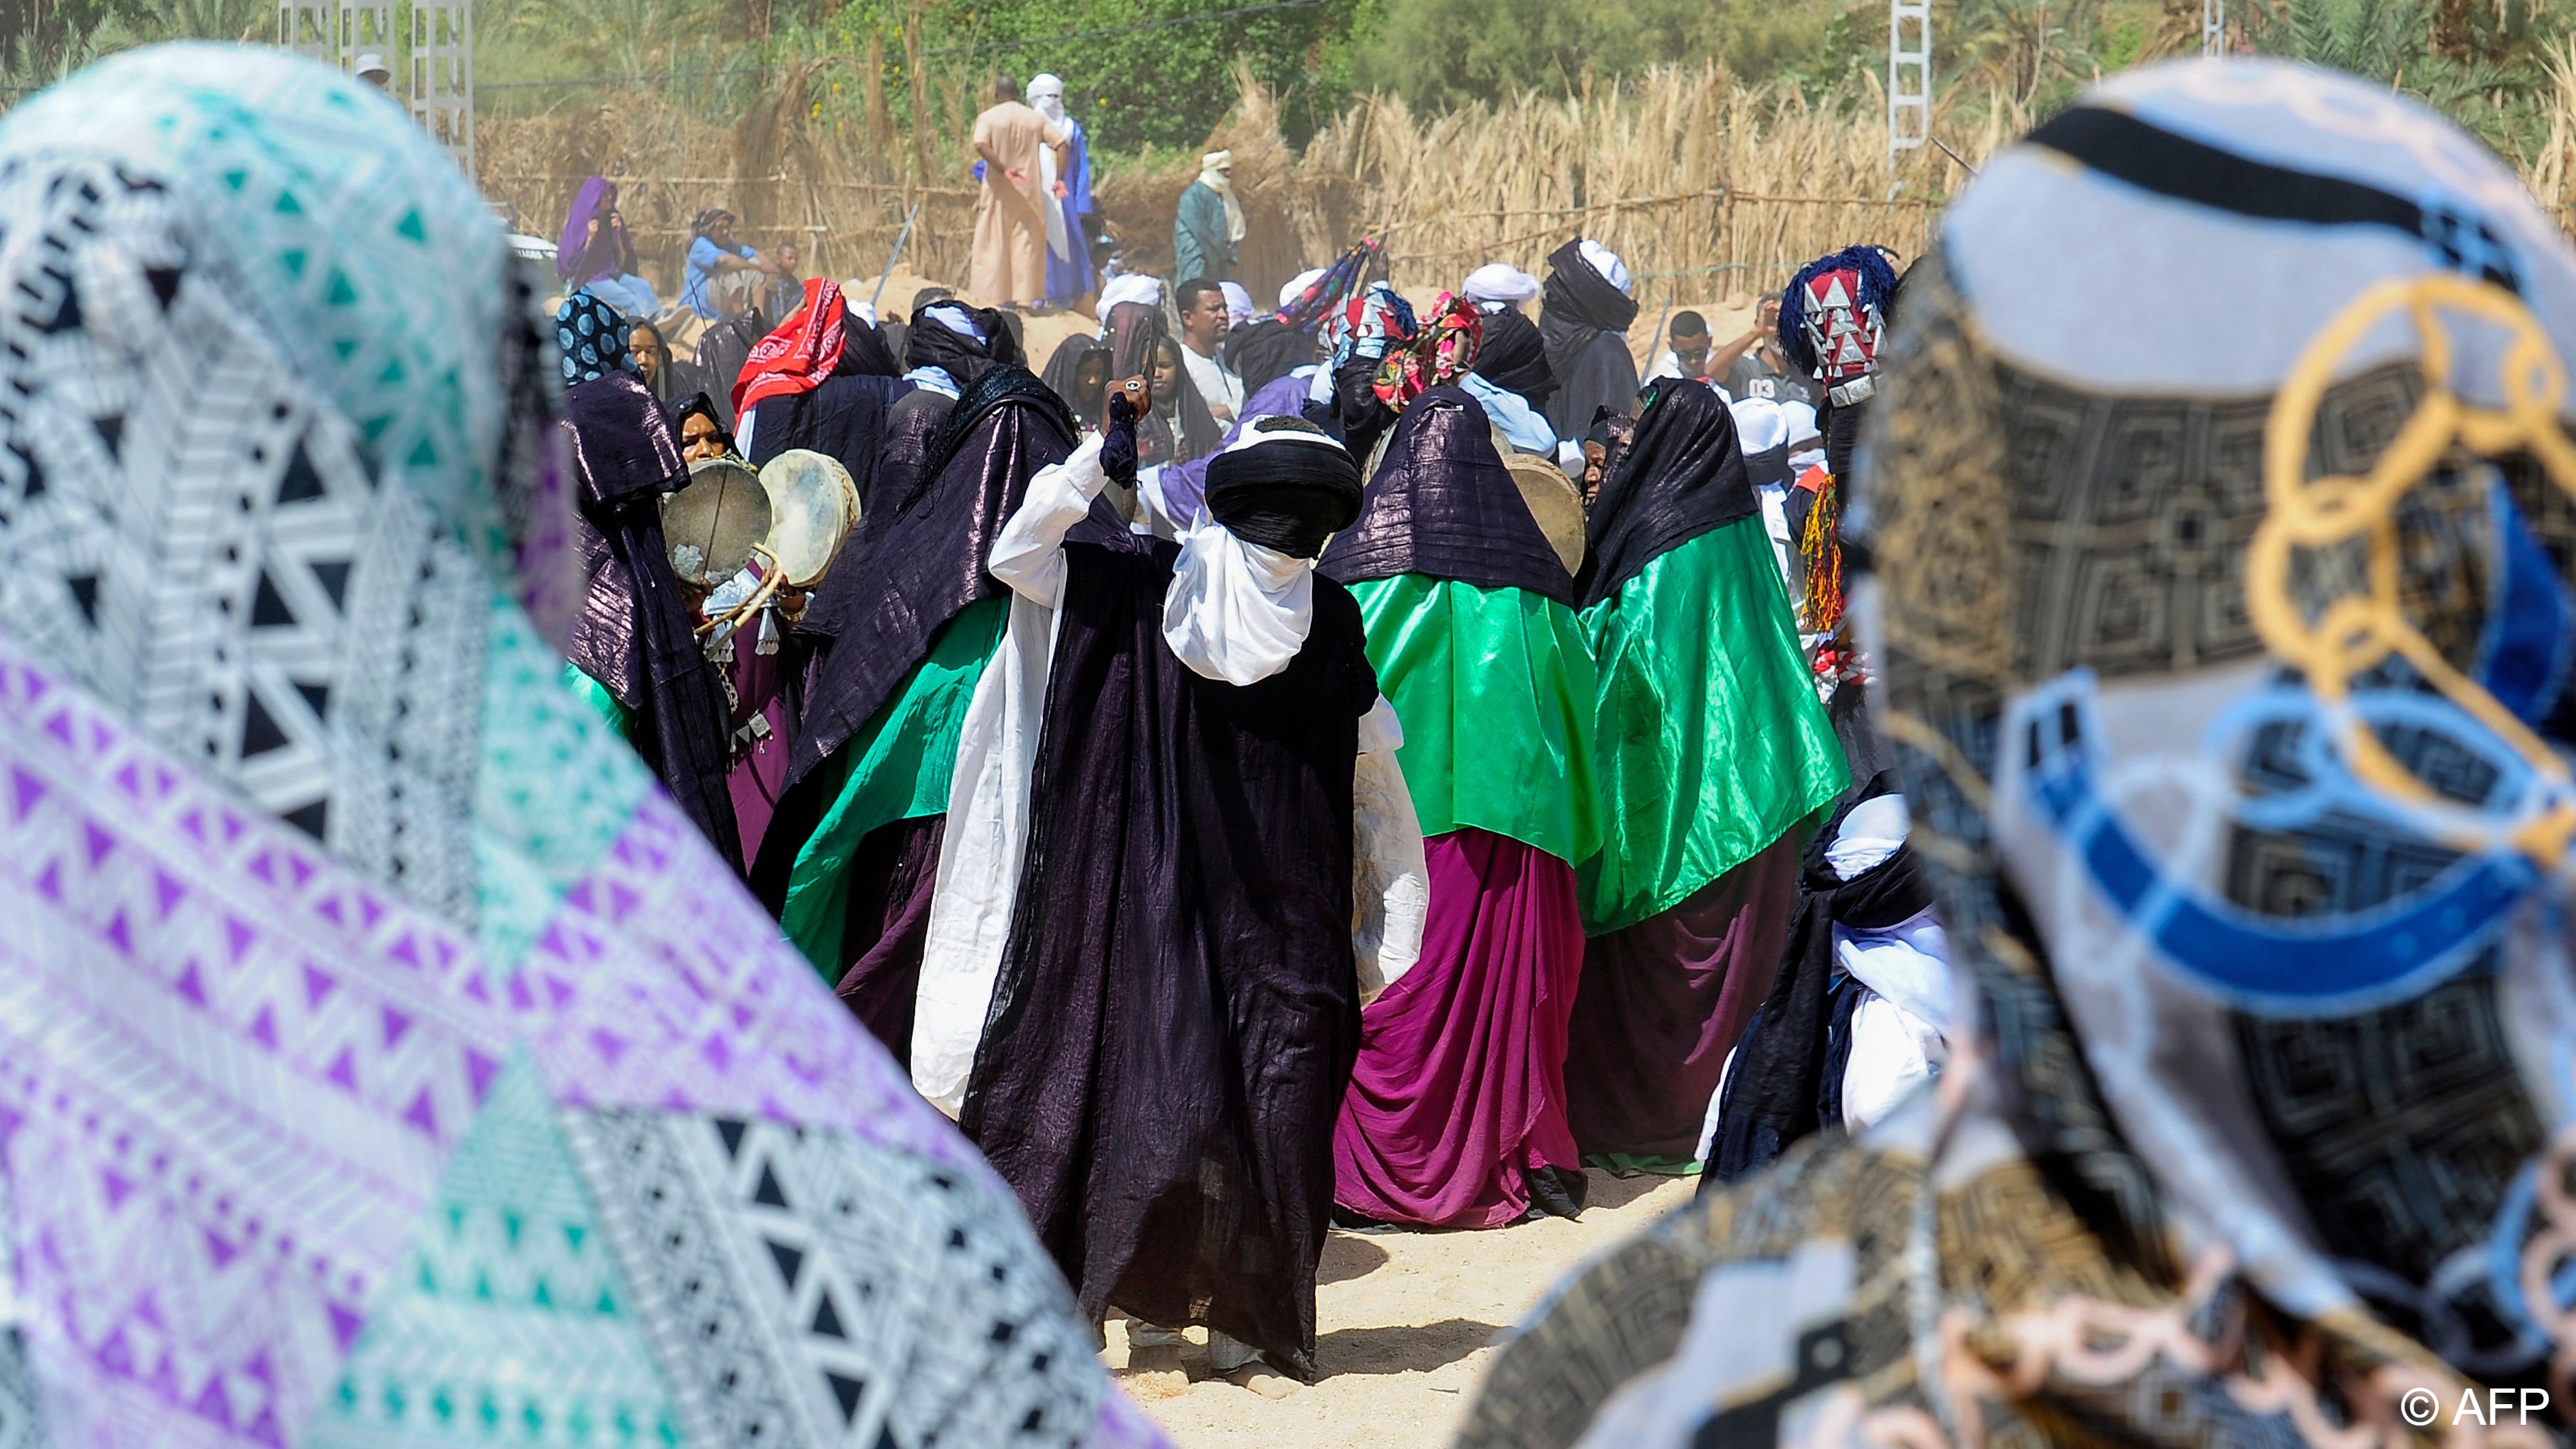 The festival marks the time, three millennia ago, when two tuareg tribes, the El Mihane and Zelouaz, put an end to a war between them (image: AFP)